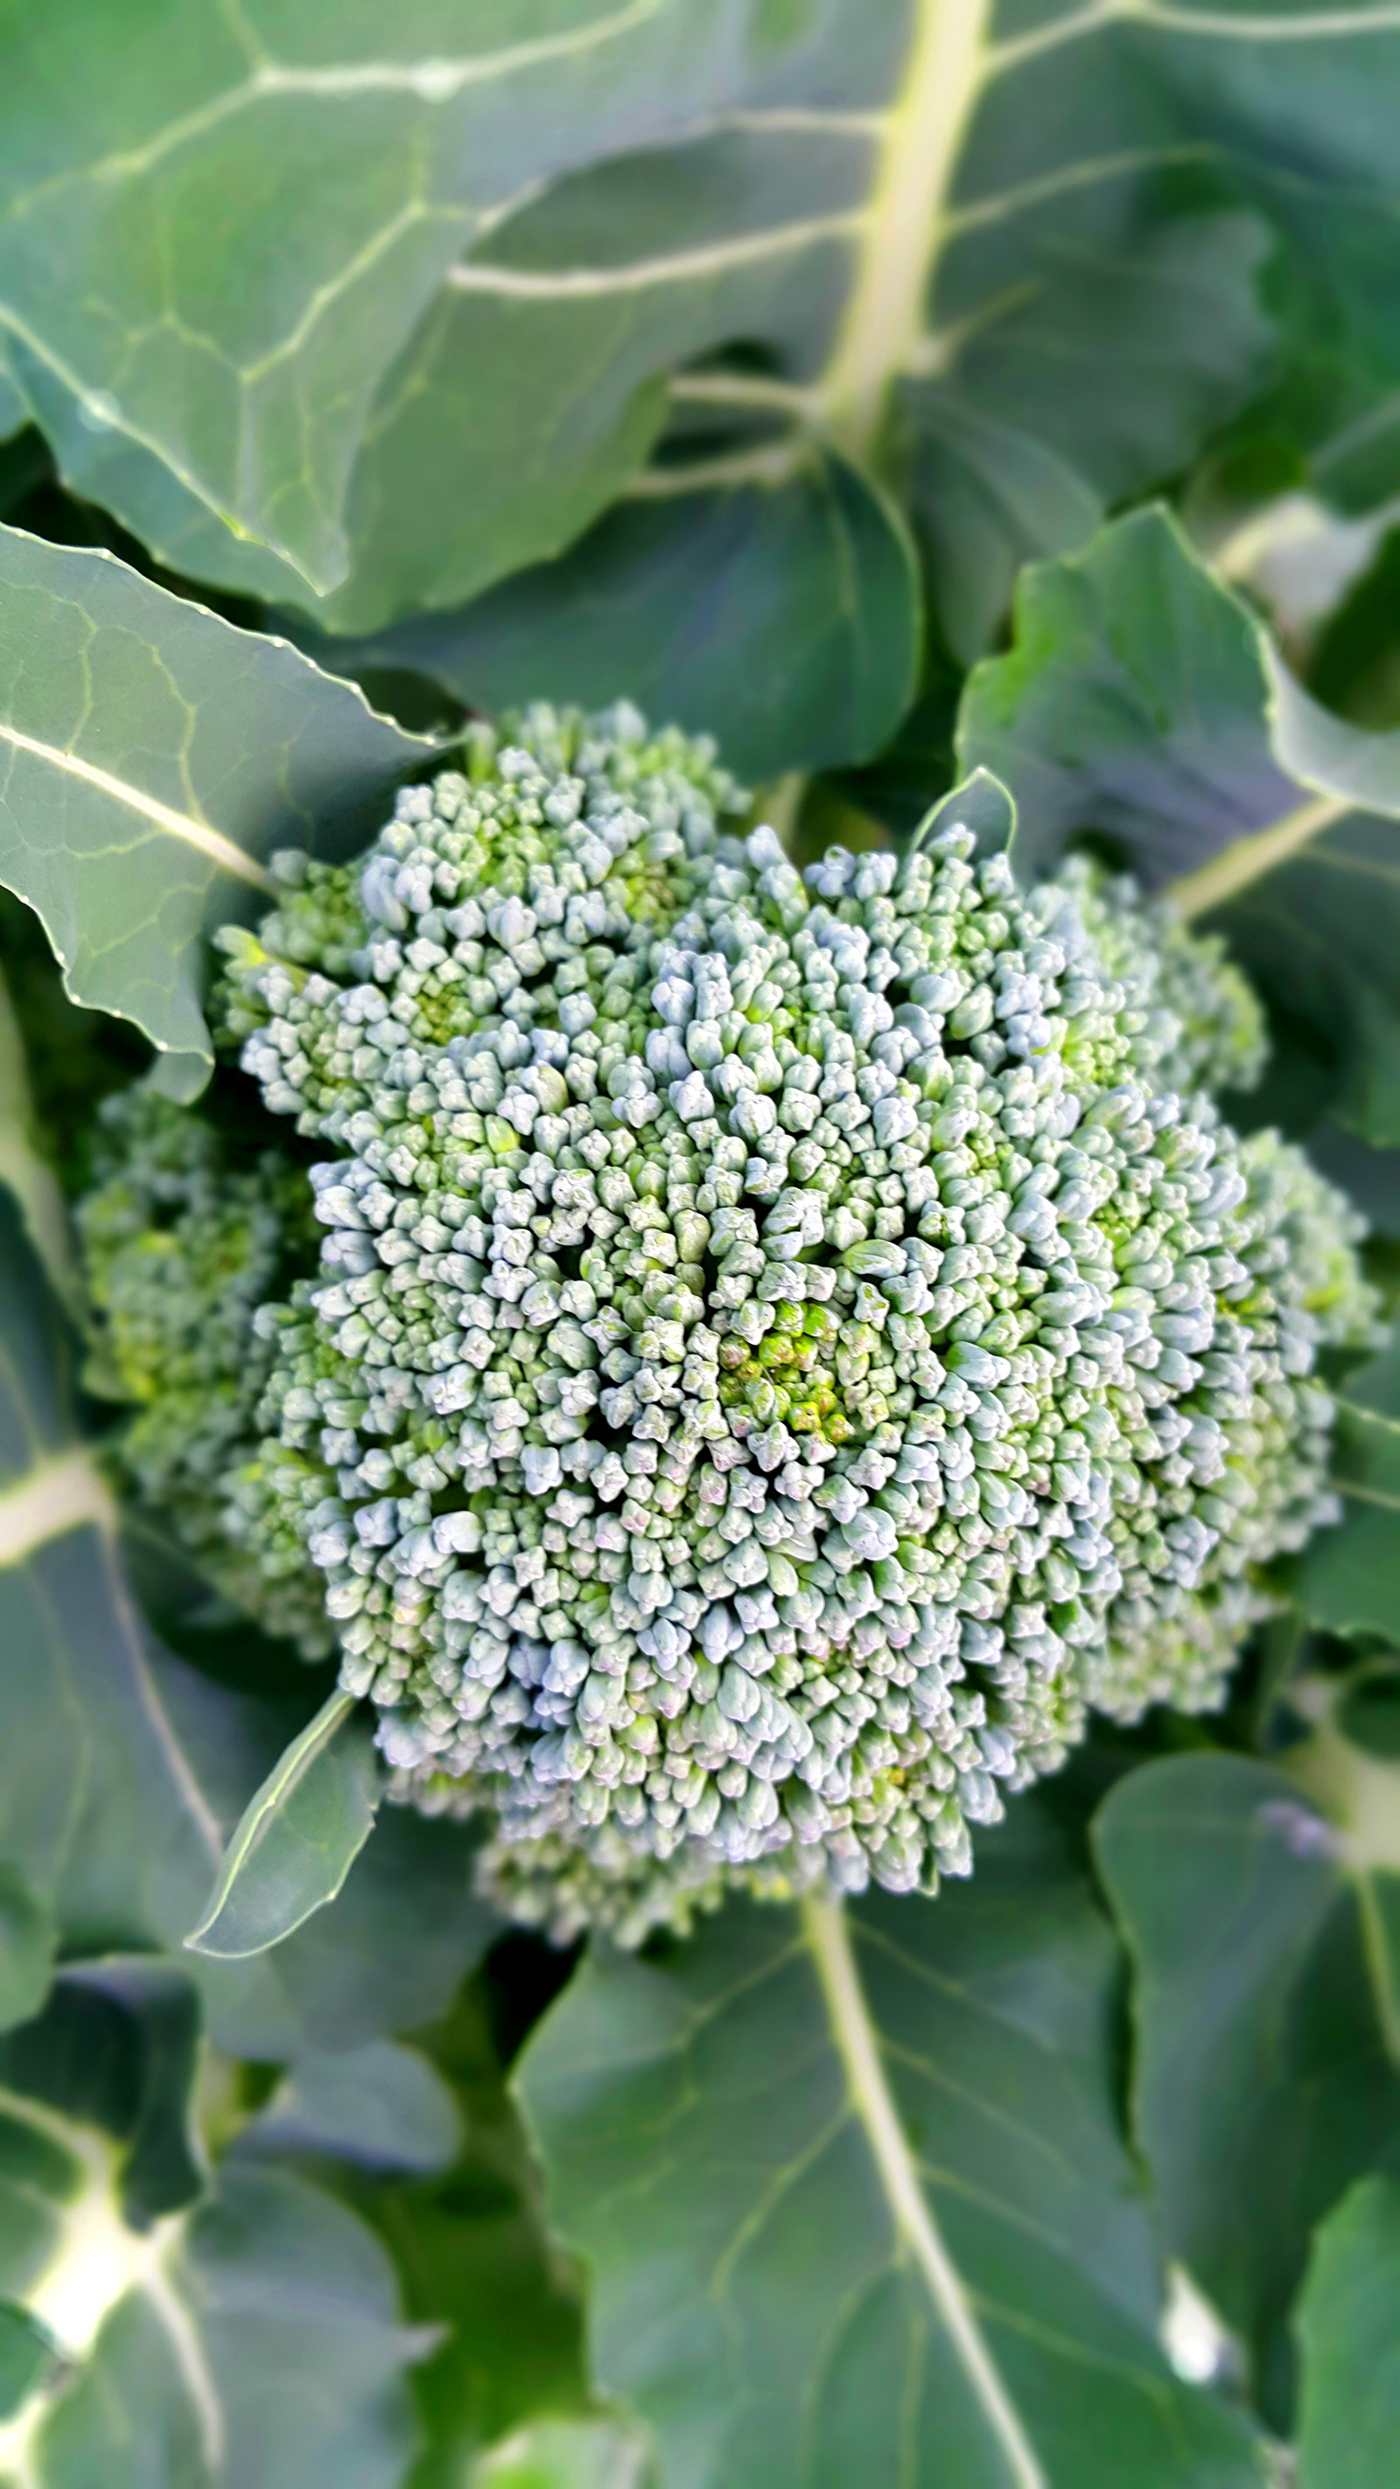 Planning a Winter Garden image close up of a broccoli head and green leaves